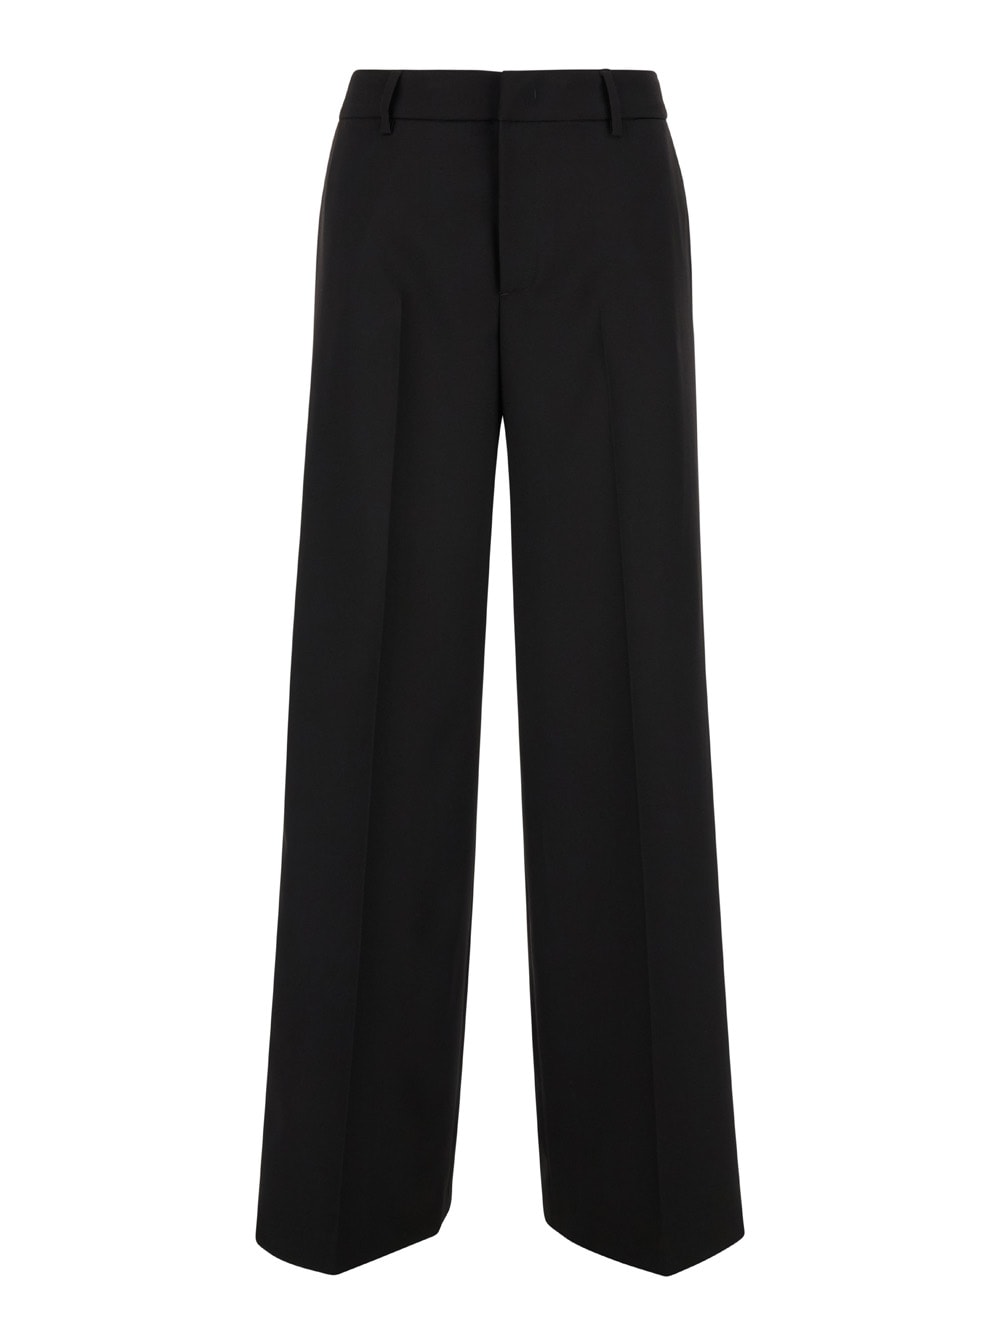 Tailored lorenza High Waisted Black Trousers In Technical Fabric Woman